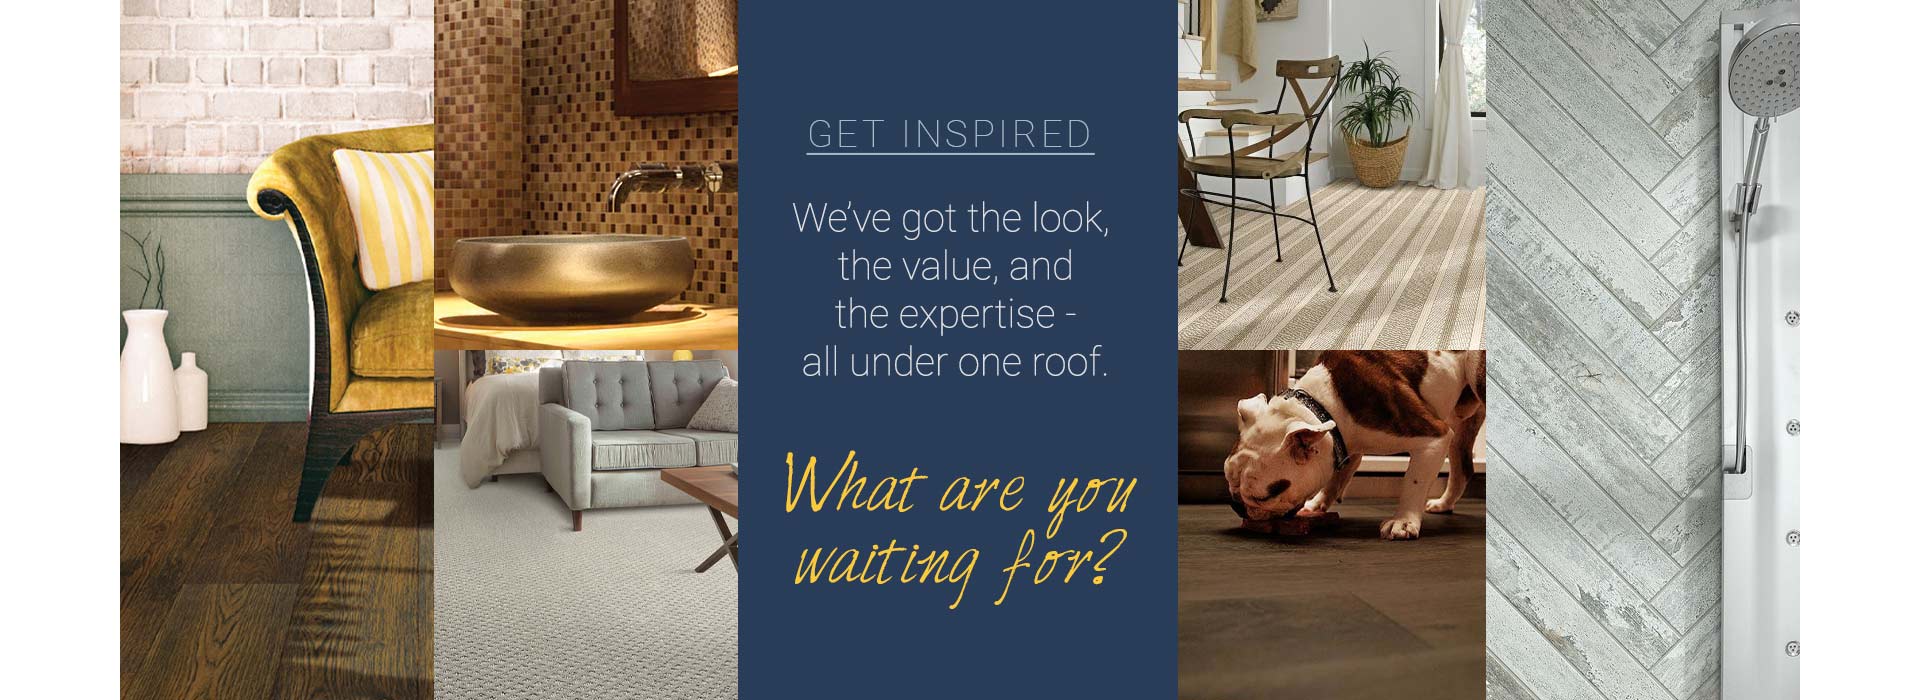 Get inspired with the latest flooring trends from Floors To Go.